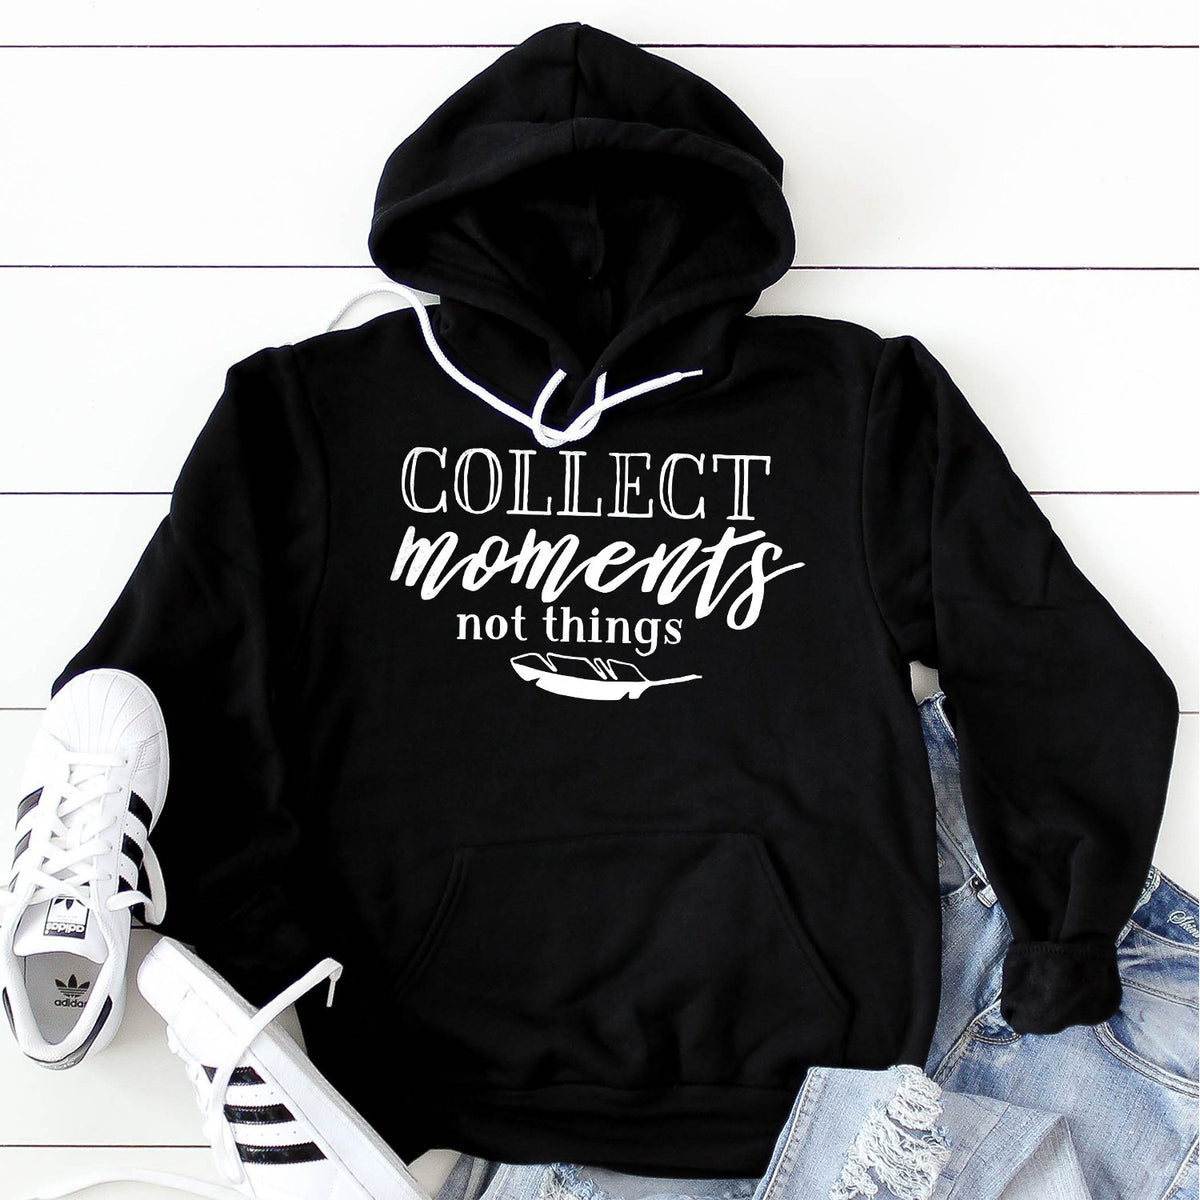 Collect Moments Not Things - Hoodie Sweatshirt